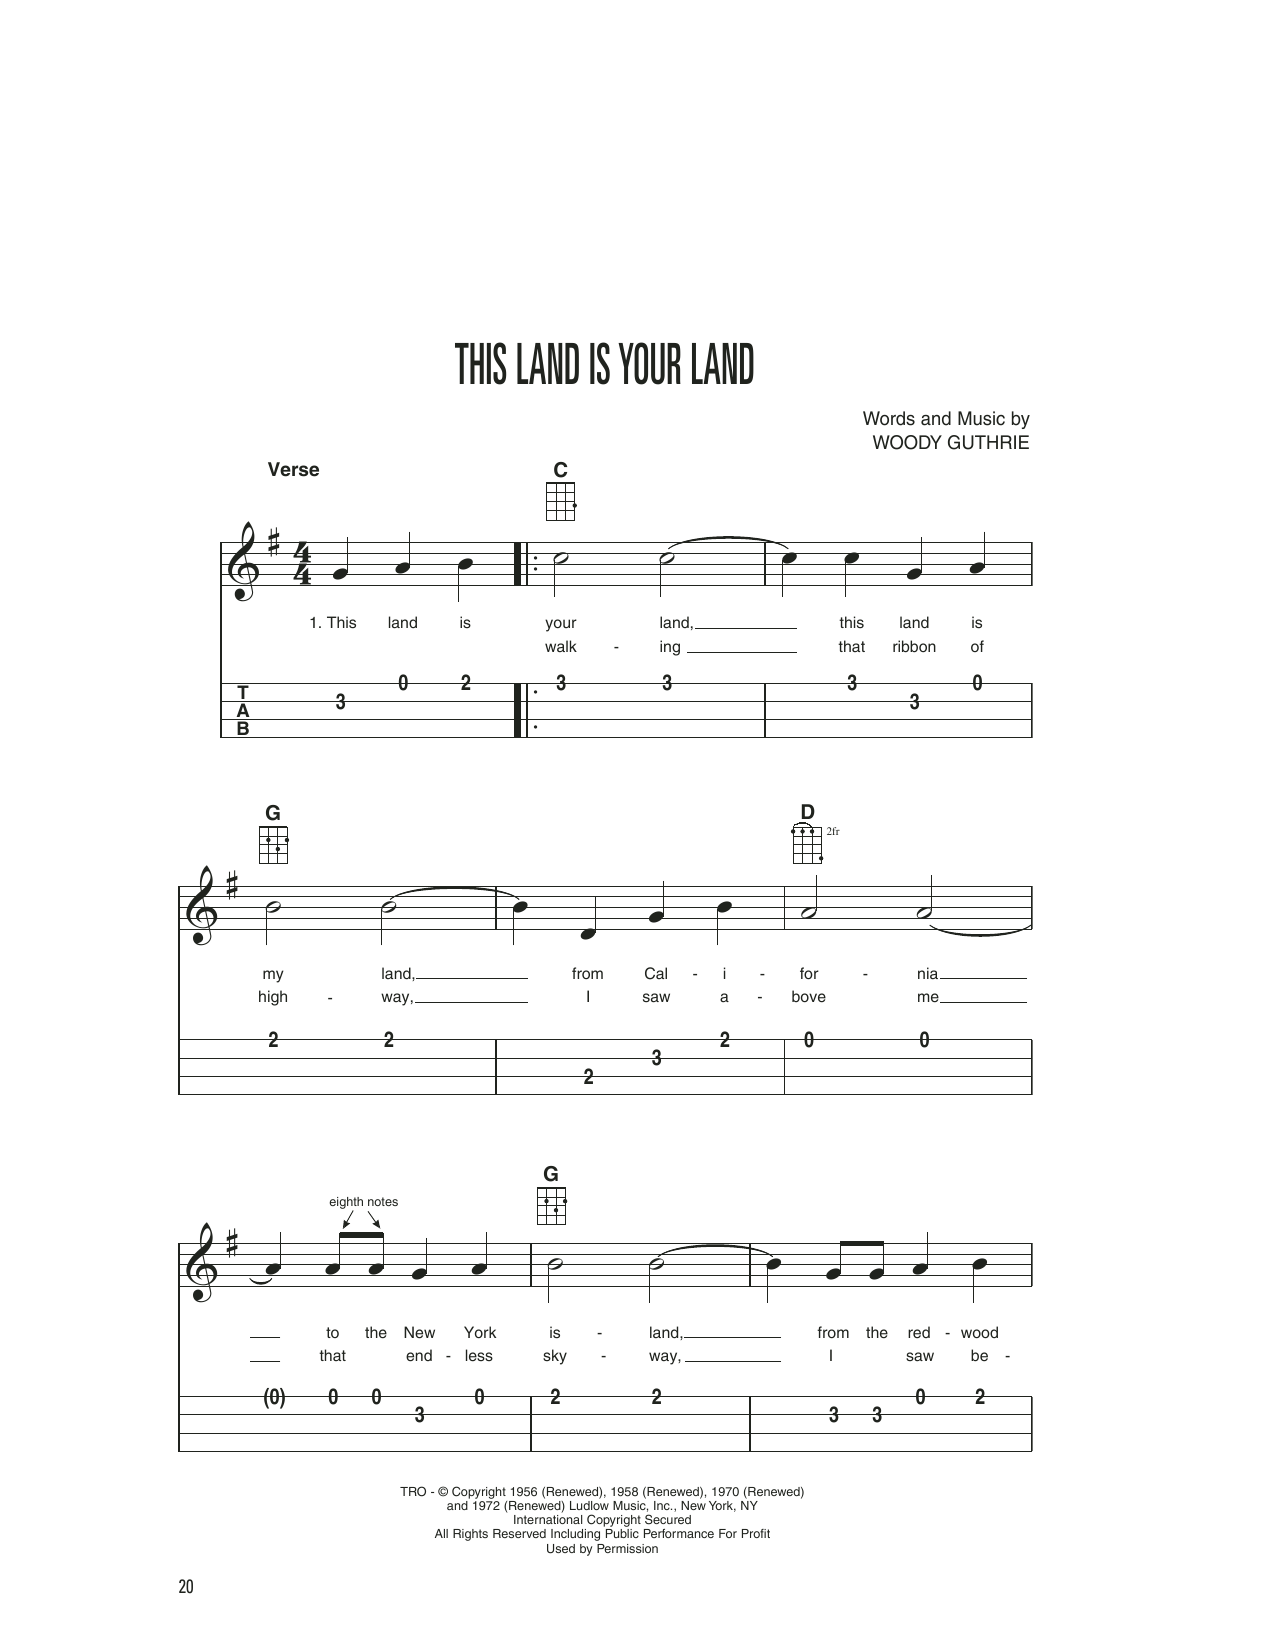 Download Woody & Arlo Guthrie This Land Is Your Land Sheet Music